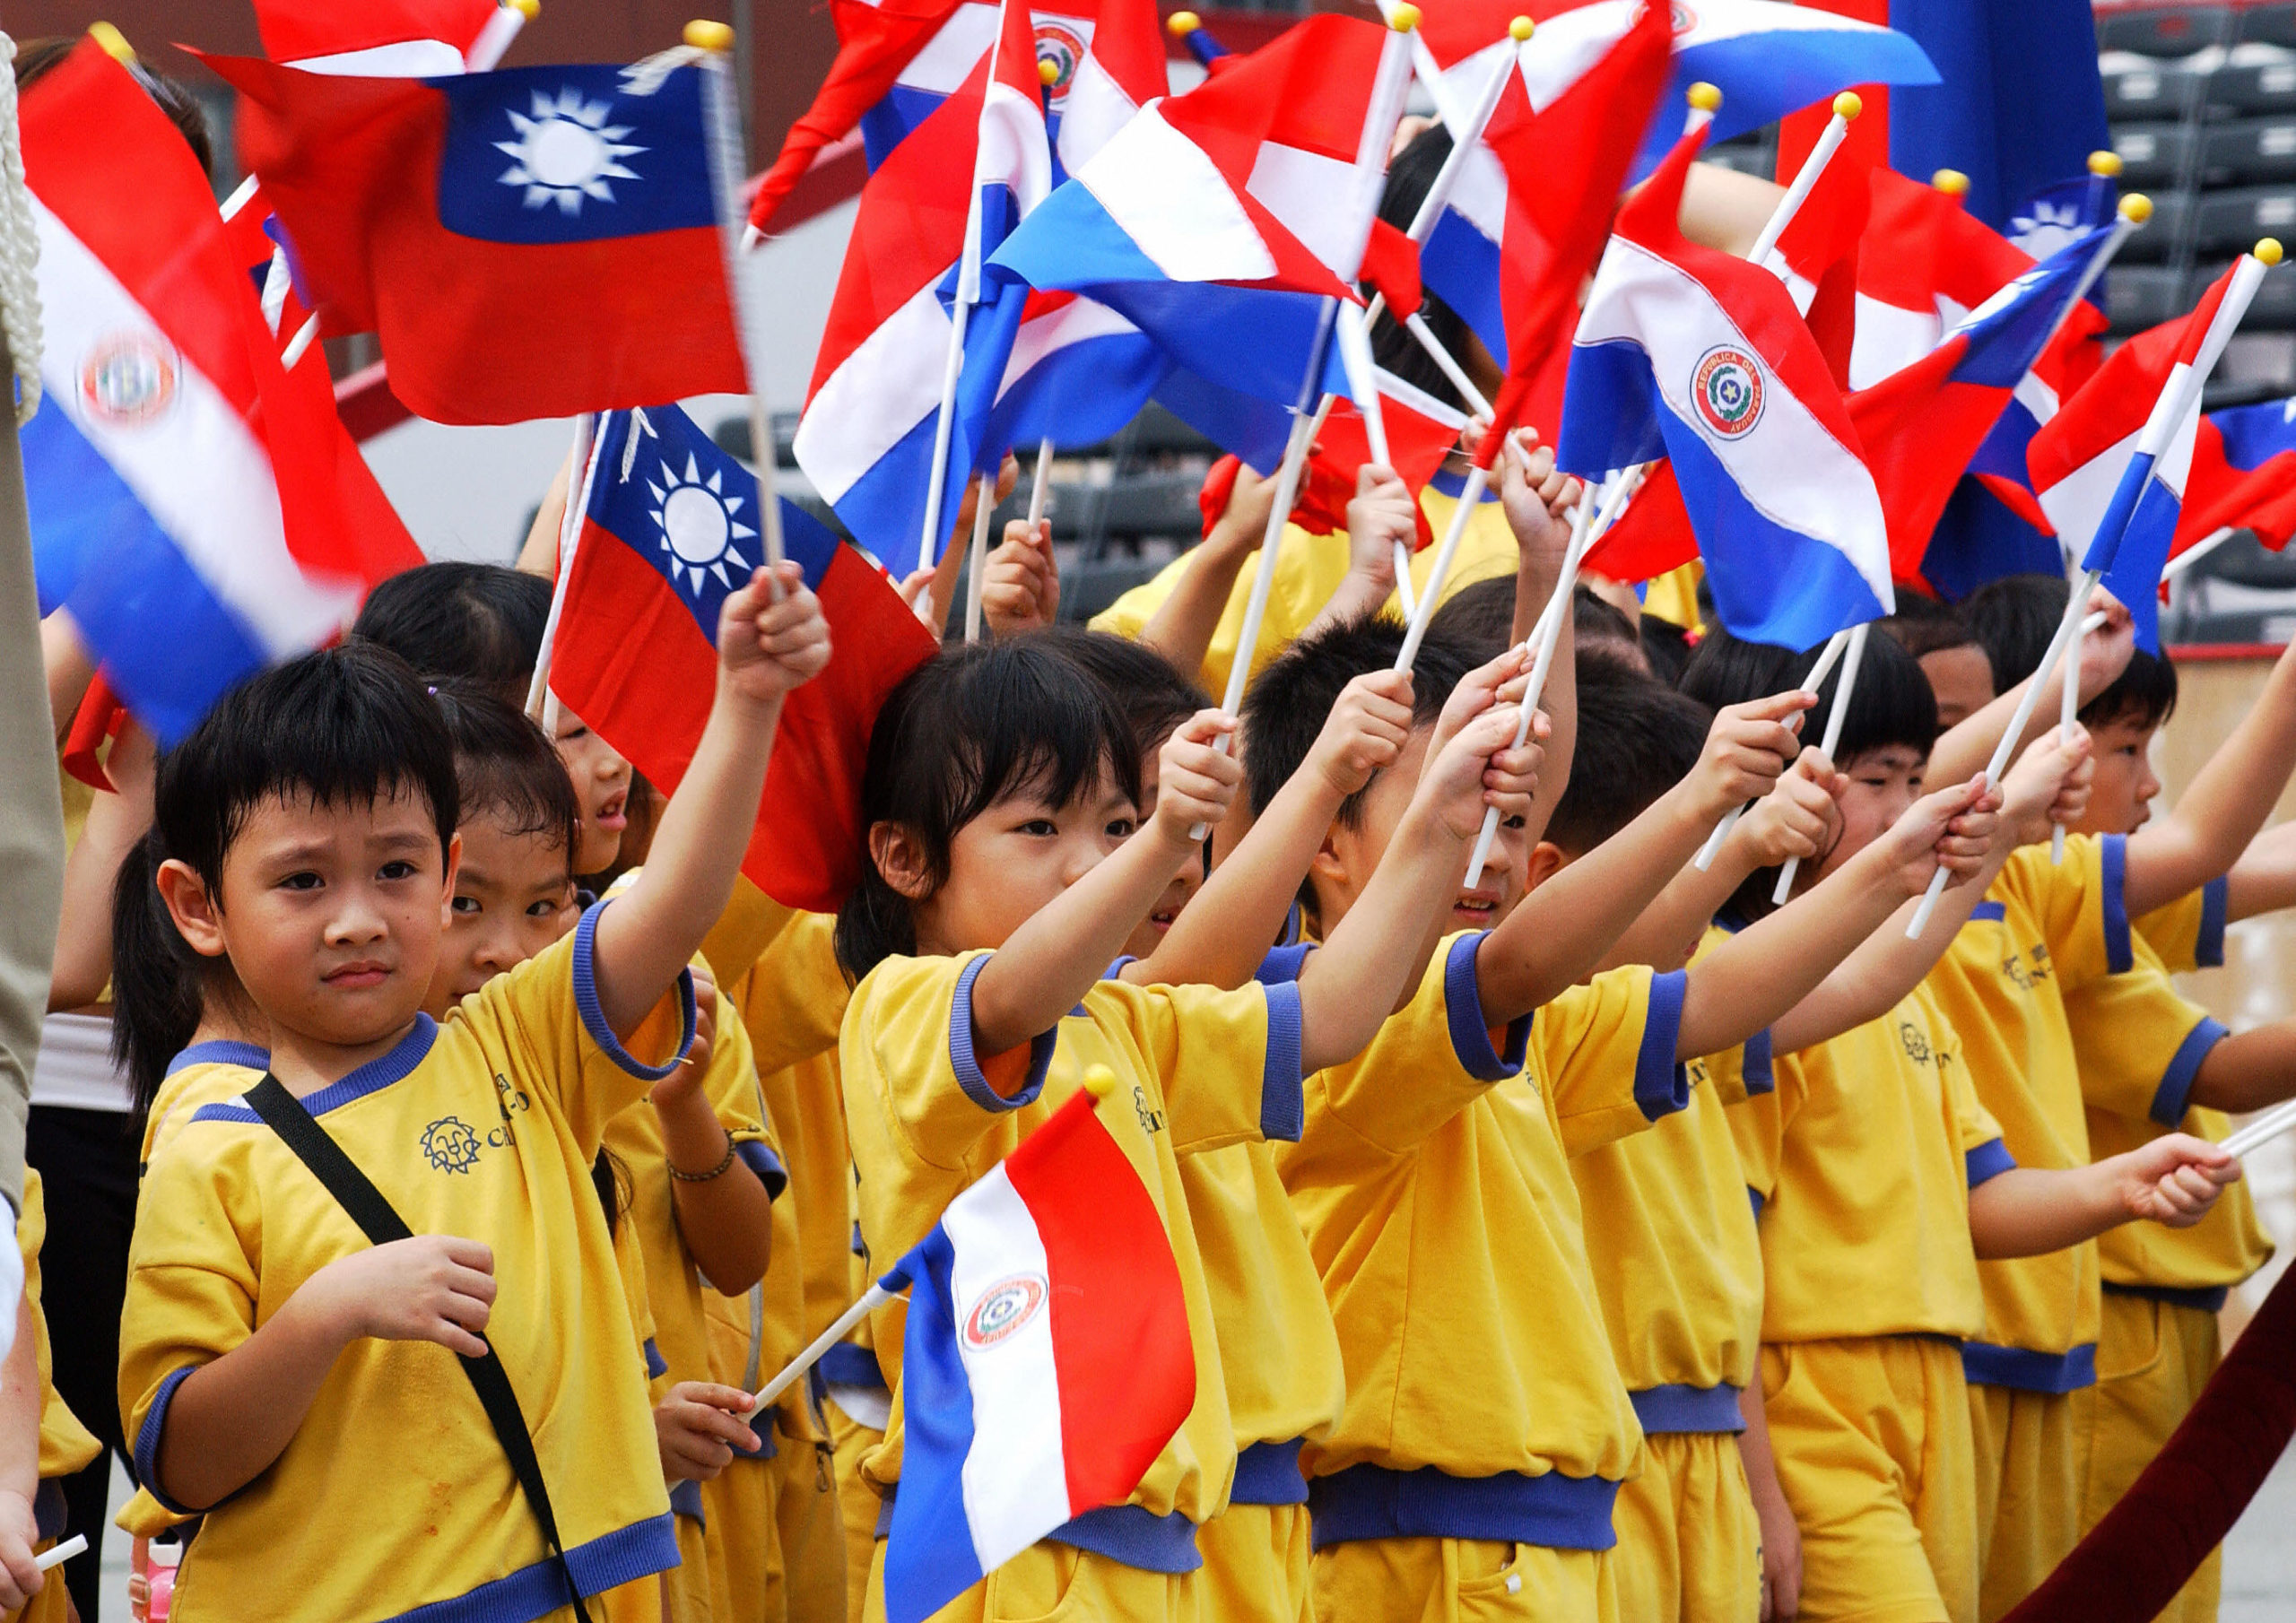 Children wave national flags of Paraguay